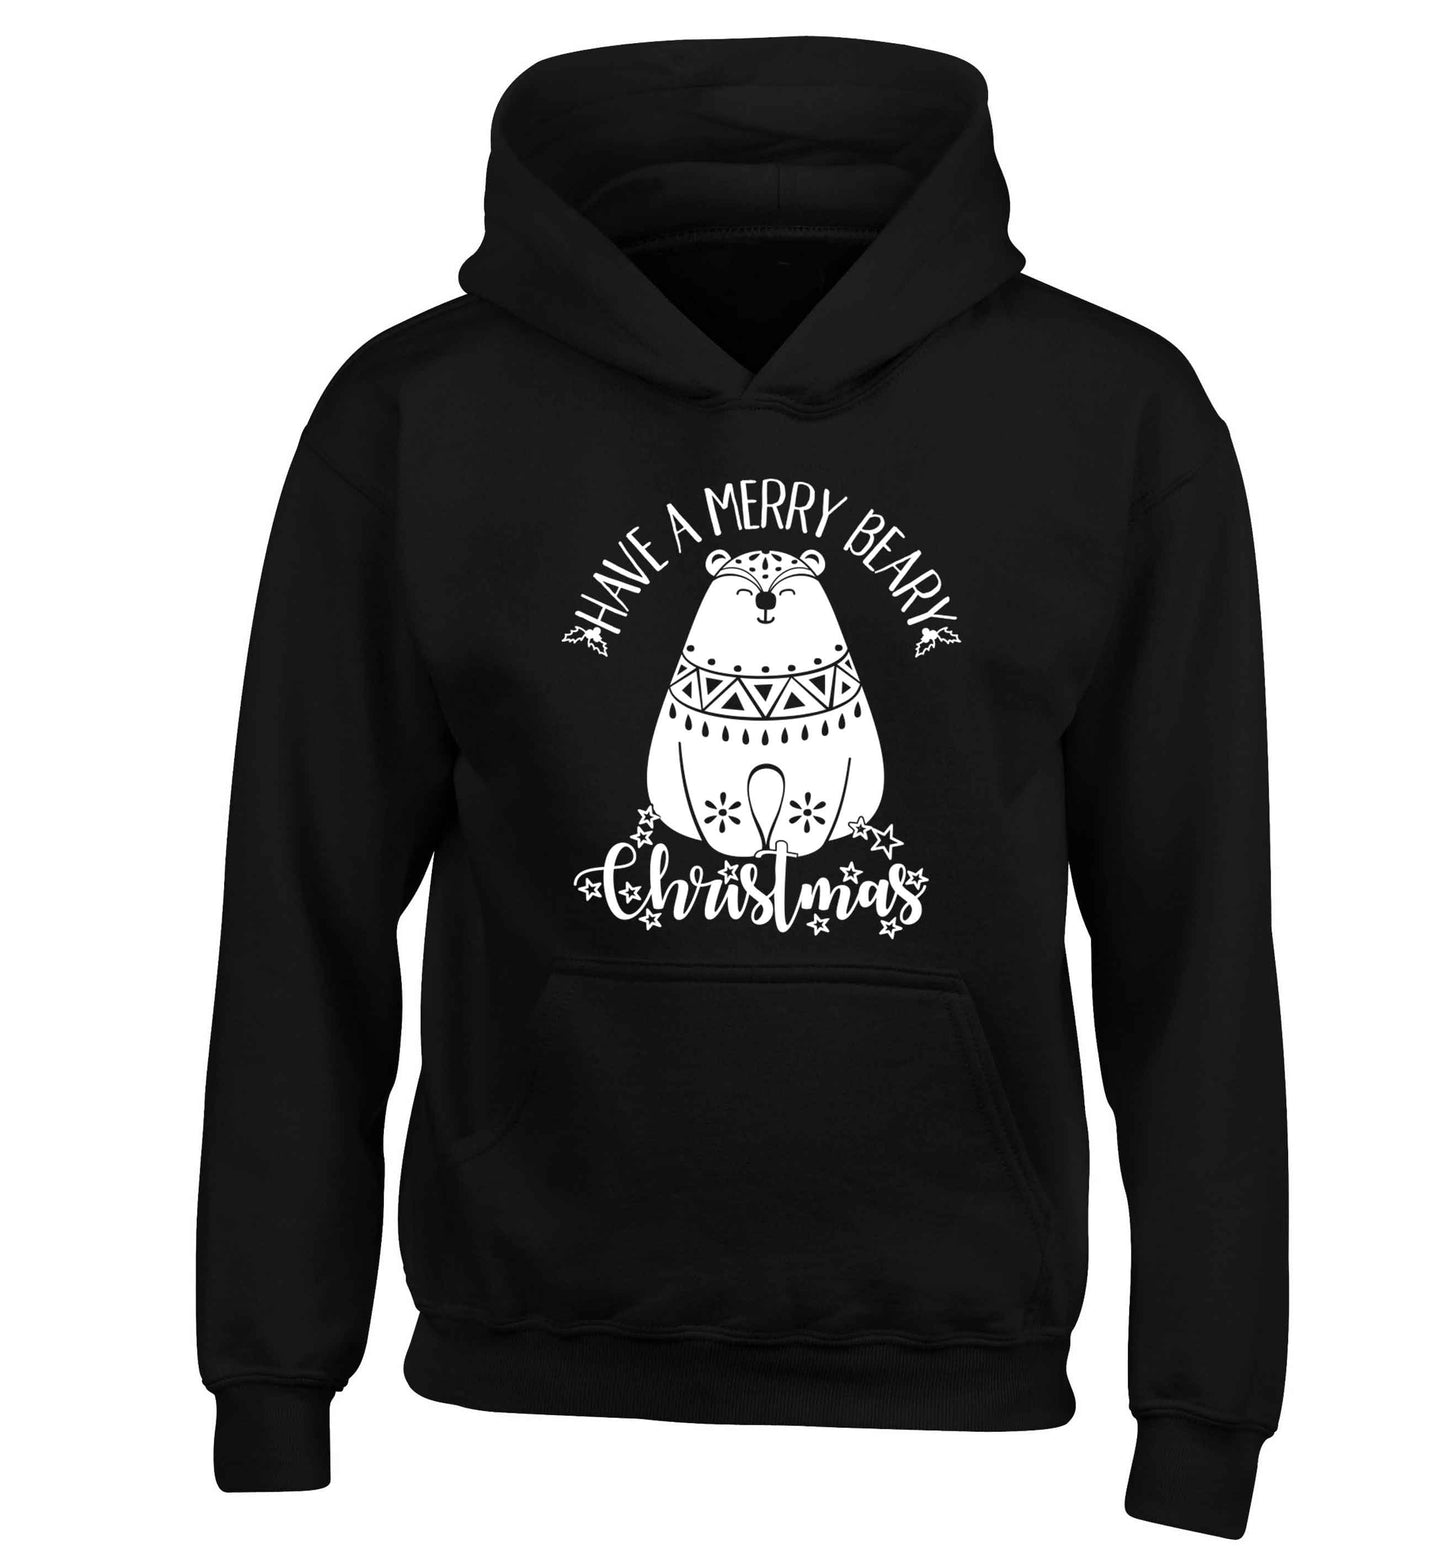 Have a merry beary Christmas children's black hoodie 12-13 Years